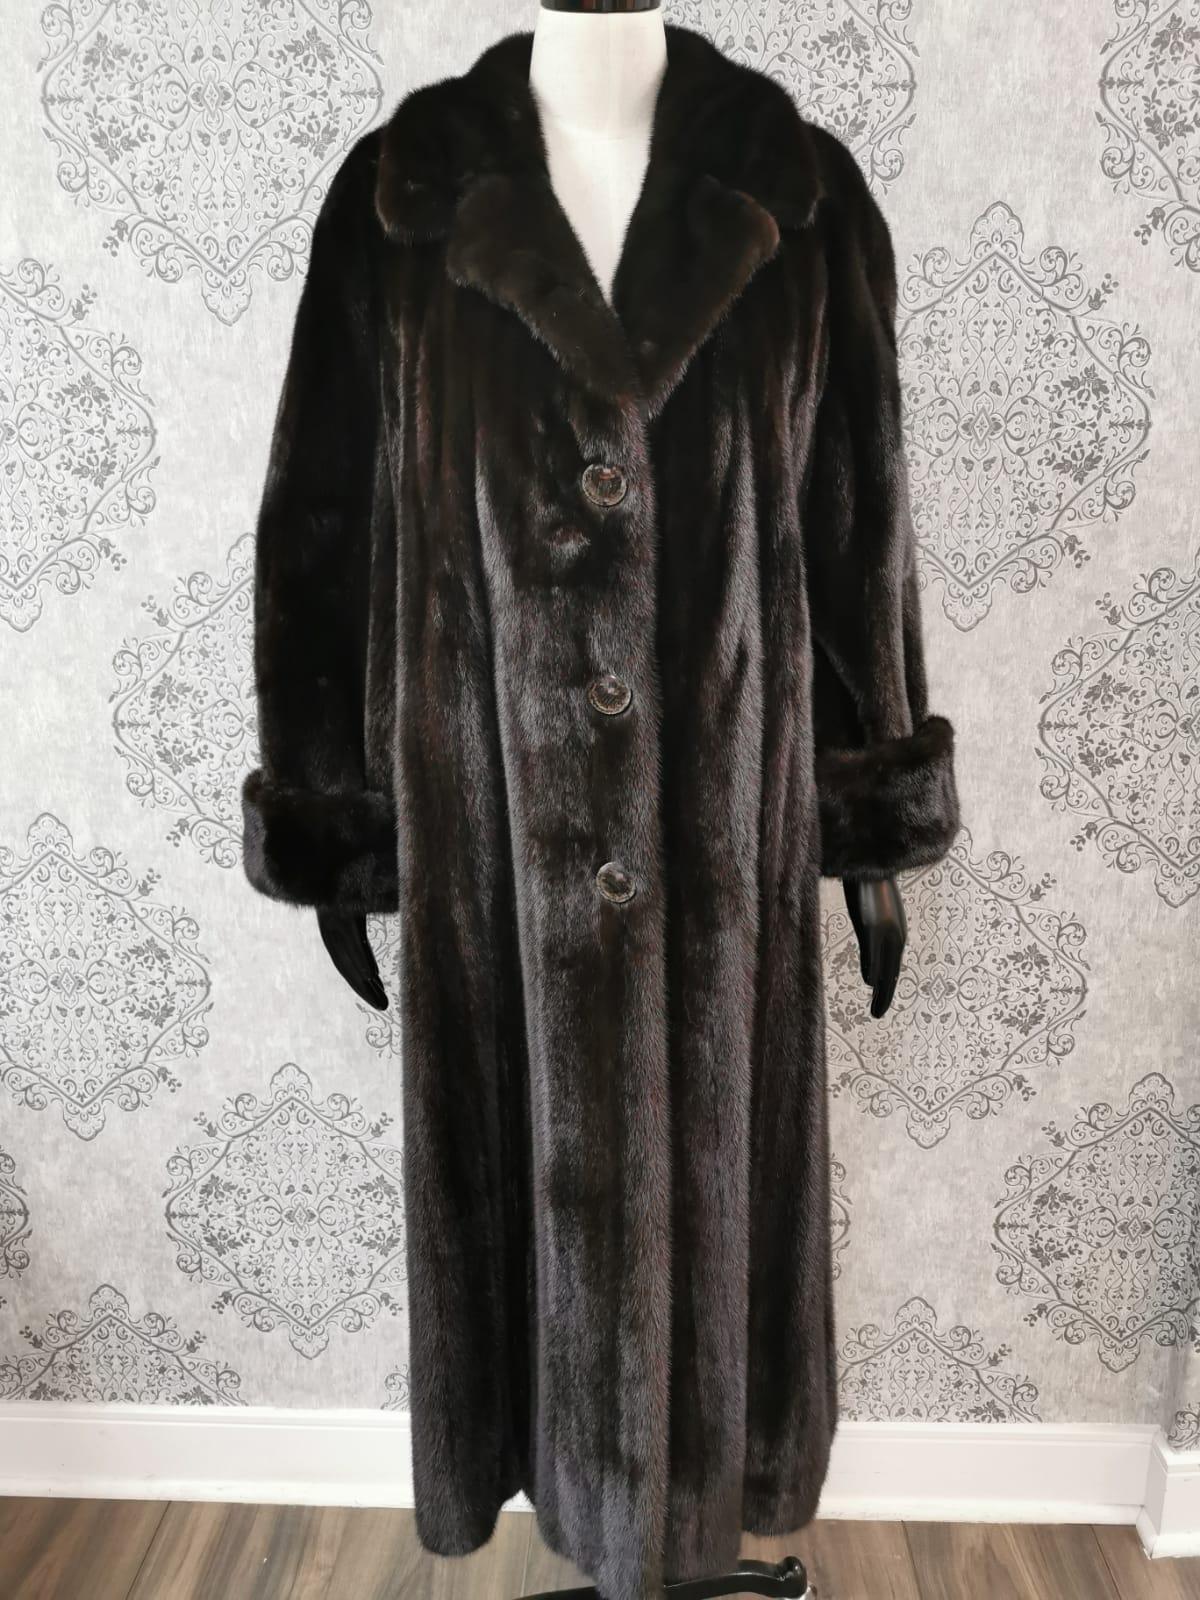 PRODUCT DESCRIPTION:

Gorgeous Pre-owned Birger Christensen Ranch female mink fur full length trench coat with long sleeves that can be rolled and gracious sweep

Condition: Like New

Closure: Buttons

Color: Dark Mahogany

Material: Ranch